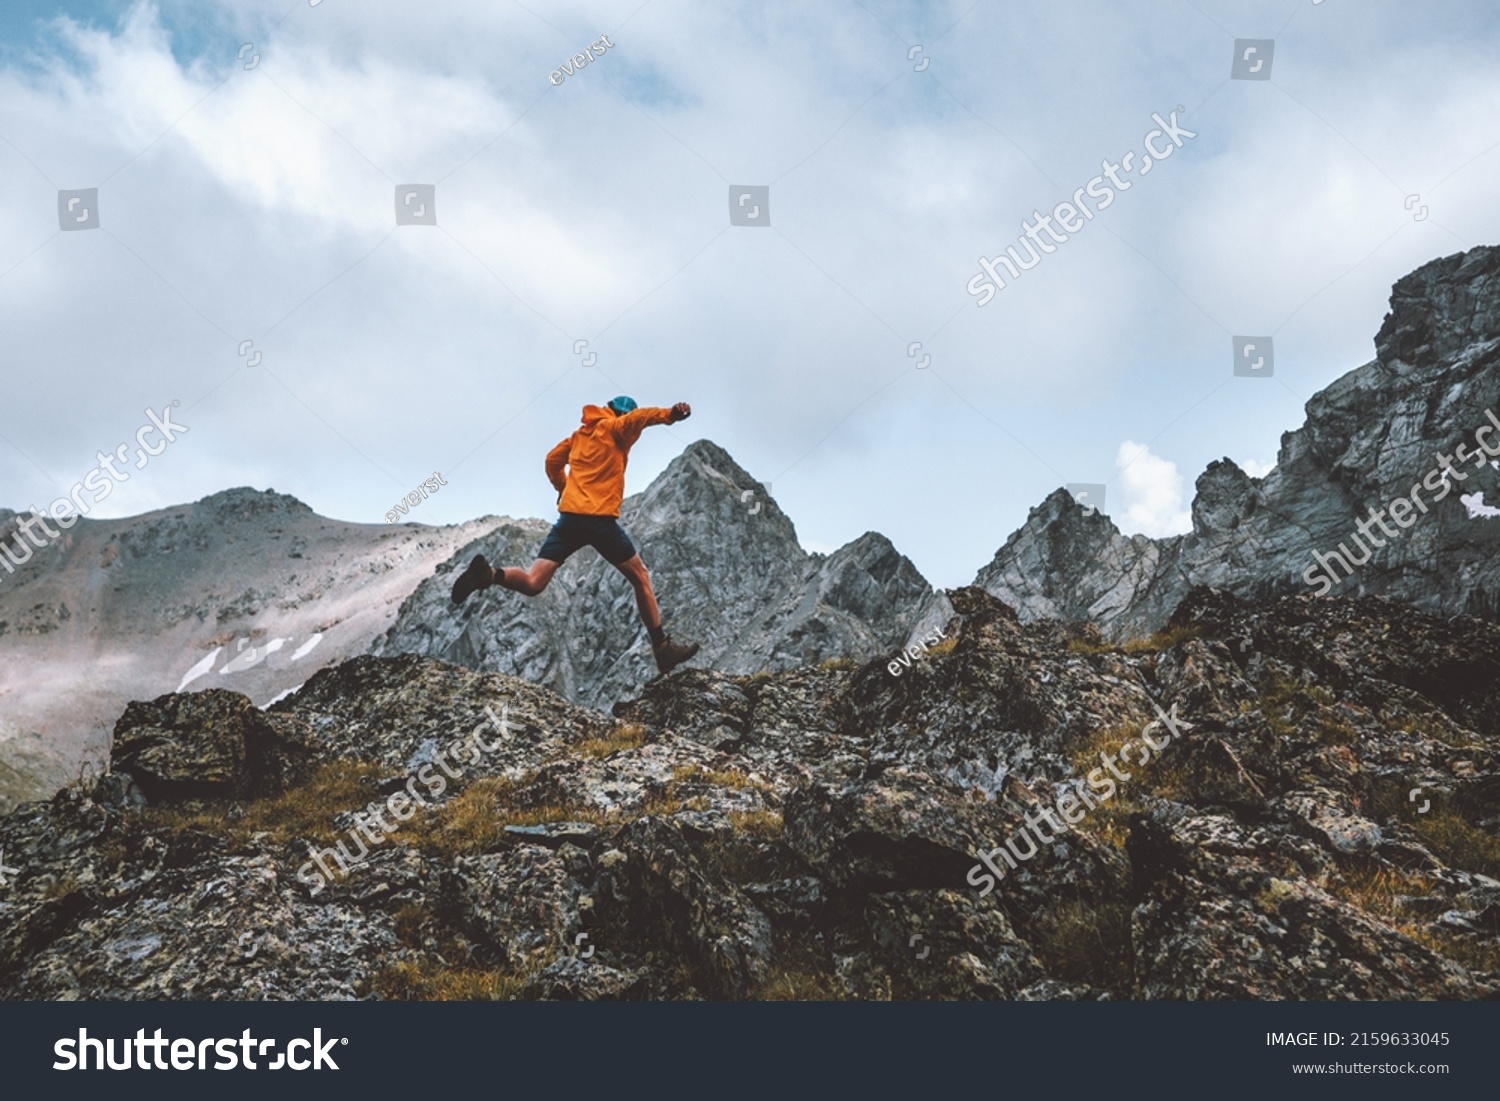 Man trail running in rocky mountains travel hiking adventure activity outdoor summer vacations healthy lifestyle skyrunning extreme sport concept #2159633045